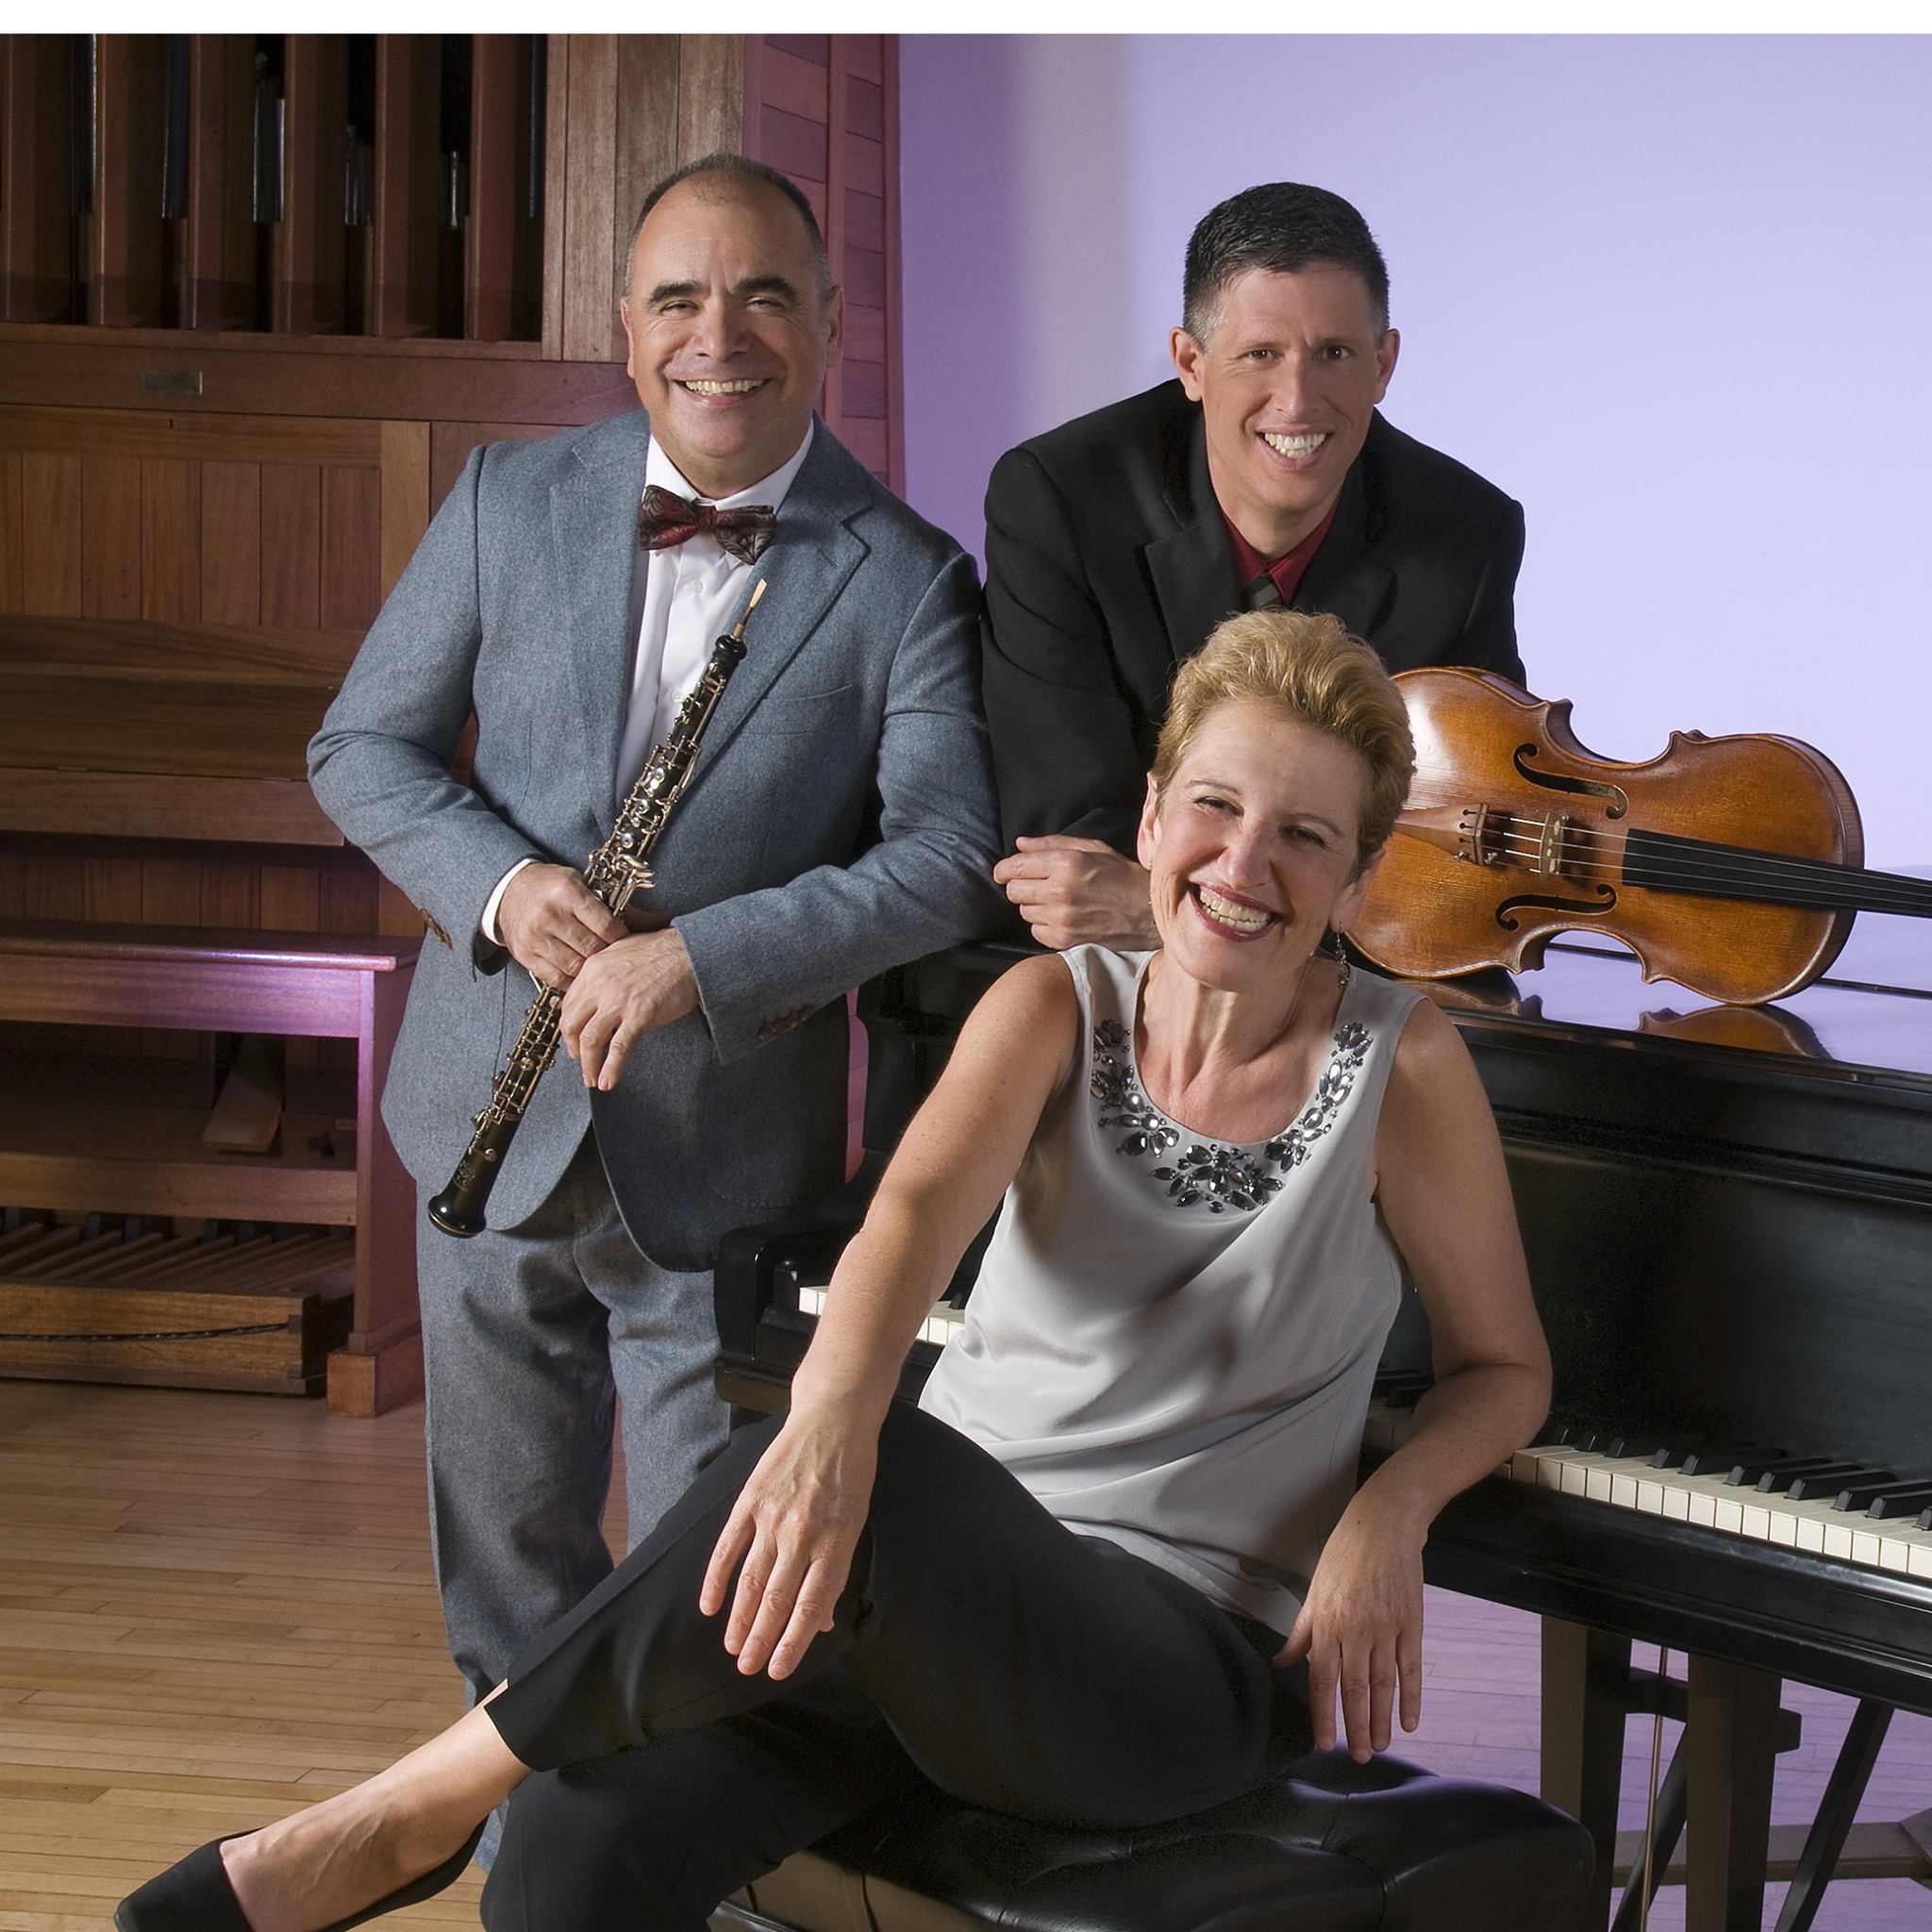 man in a gray suit standing holding an oboe, a man in a black suit leaning against a piano and a woman in a gray top sitting on a bench in front of a piano